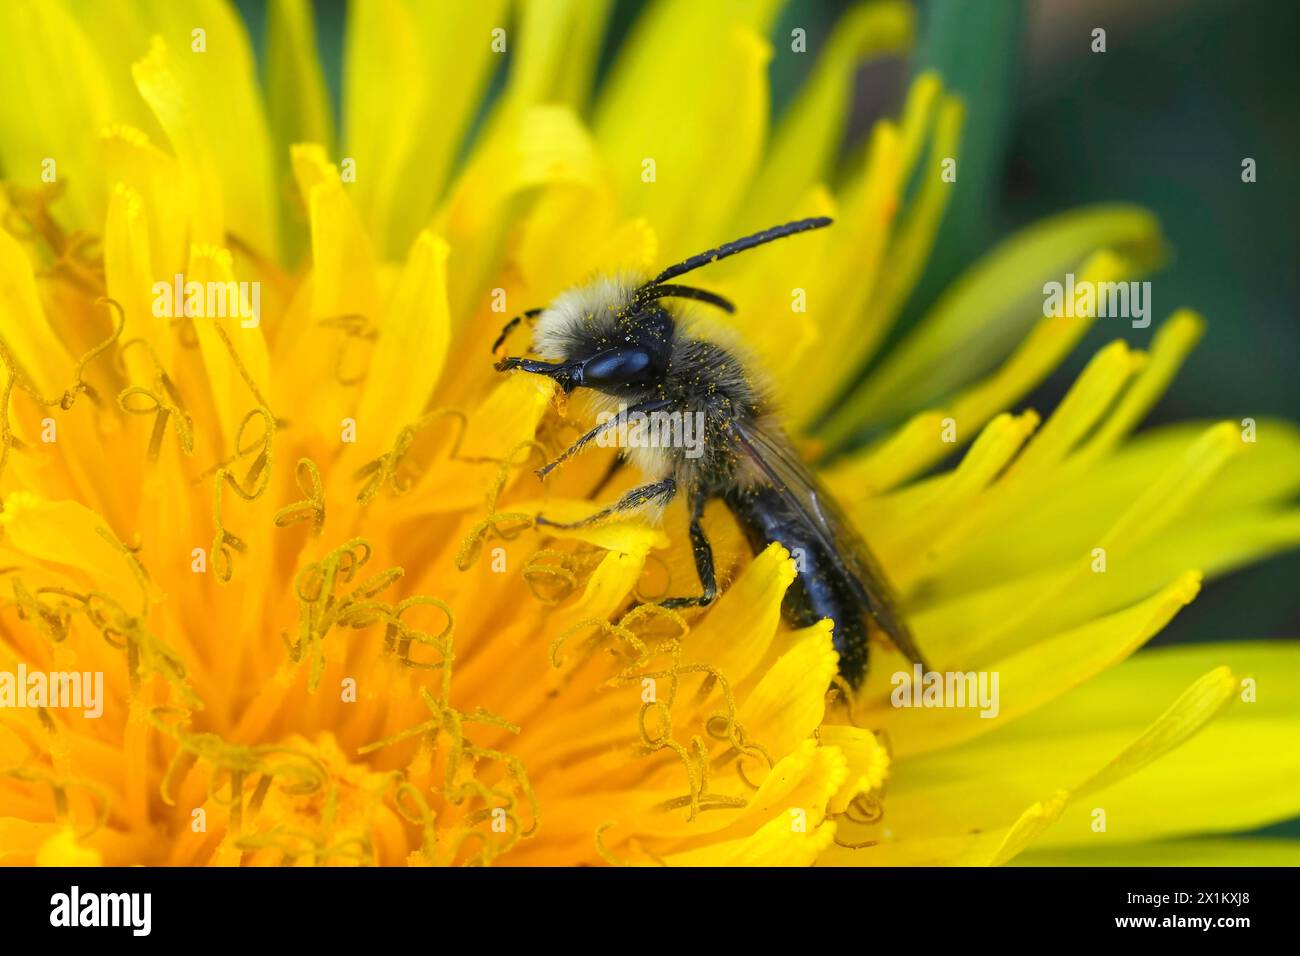 Natural closeup on a male Mellow miner solitary bee, Andrena mitis in a yellow dandelion flower Stock Photo